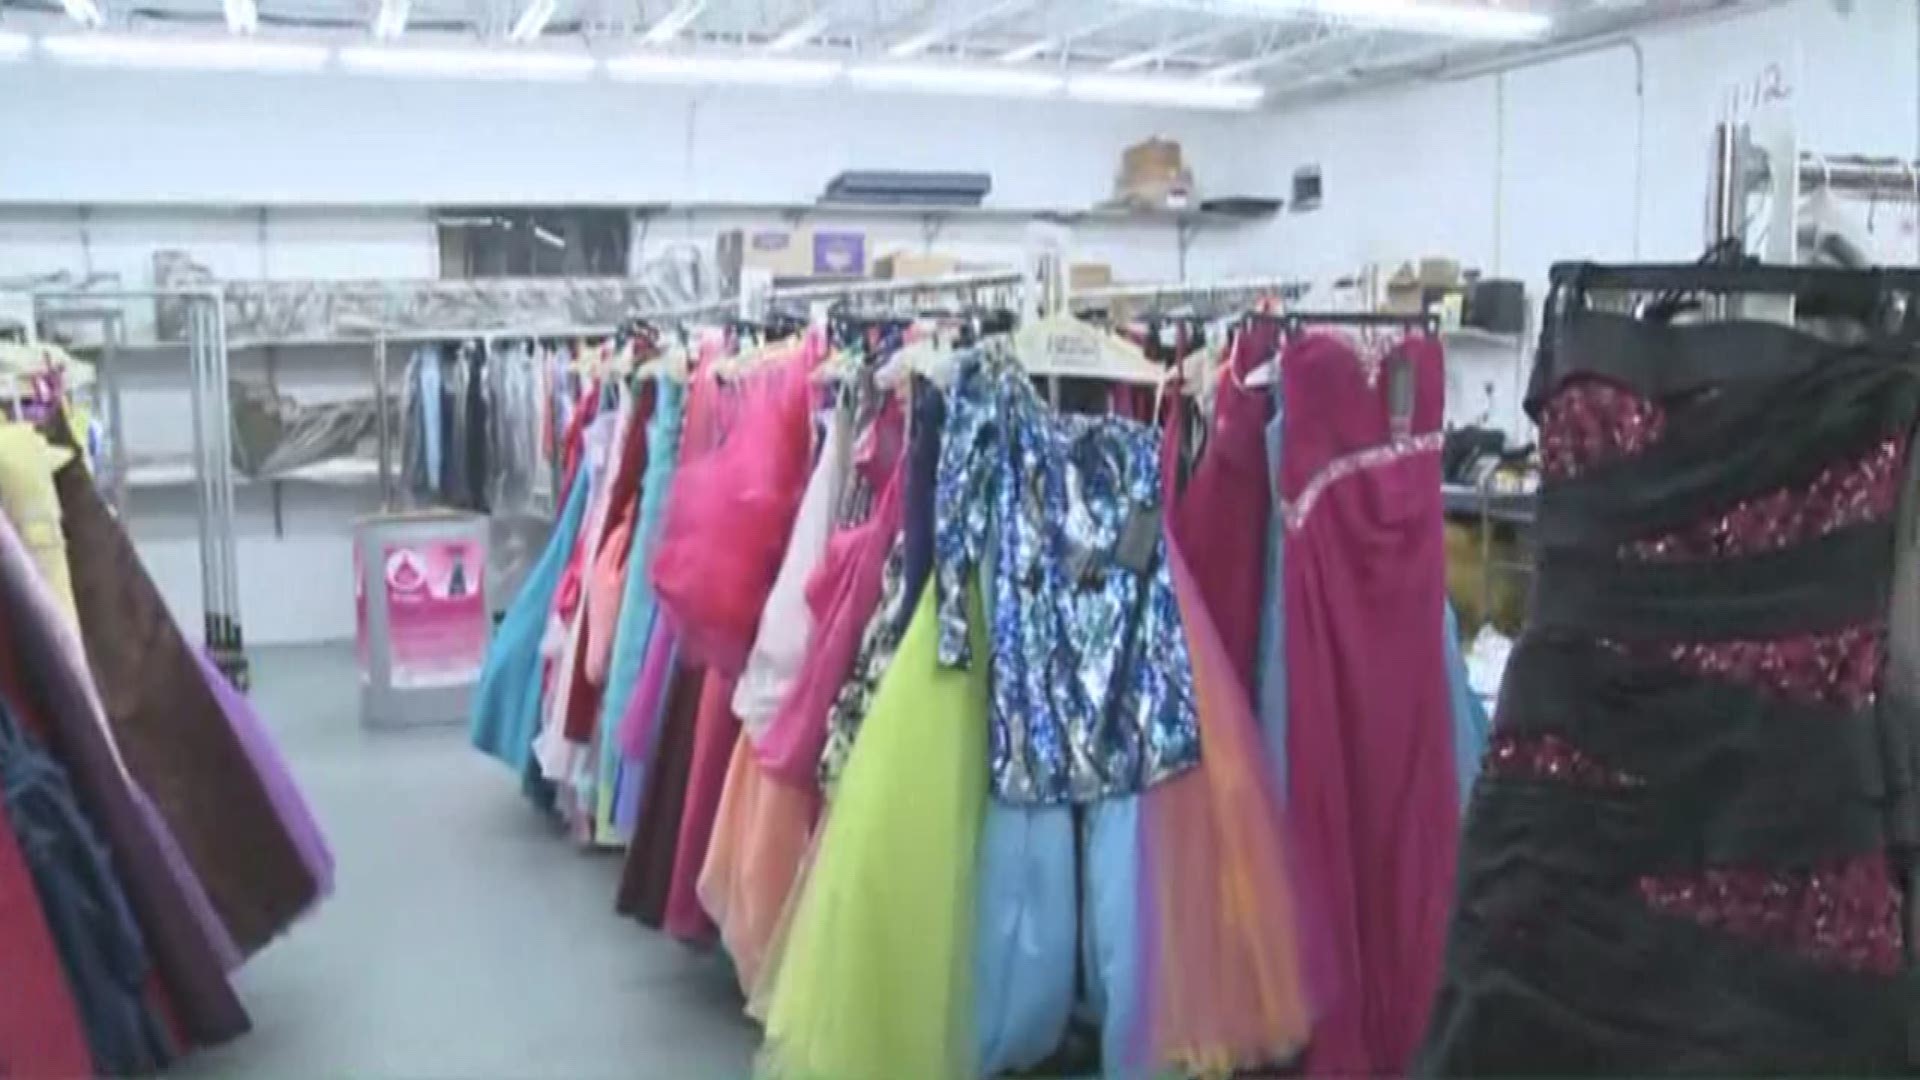 Daybreak's Kevin O'Neill celebrates prom season in Western New York and the "Gowns for Prom" event.